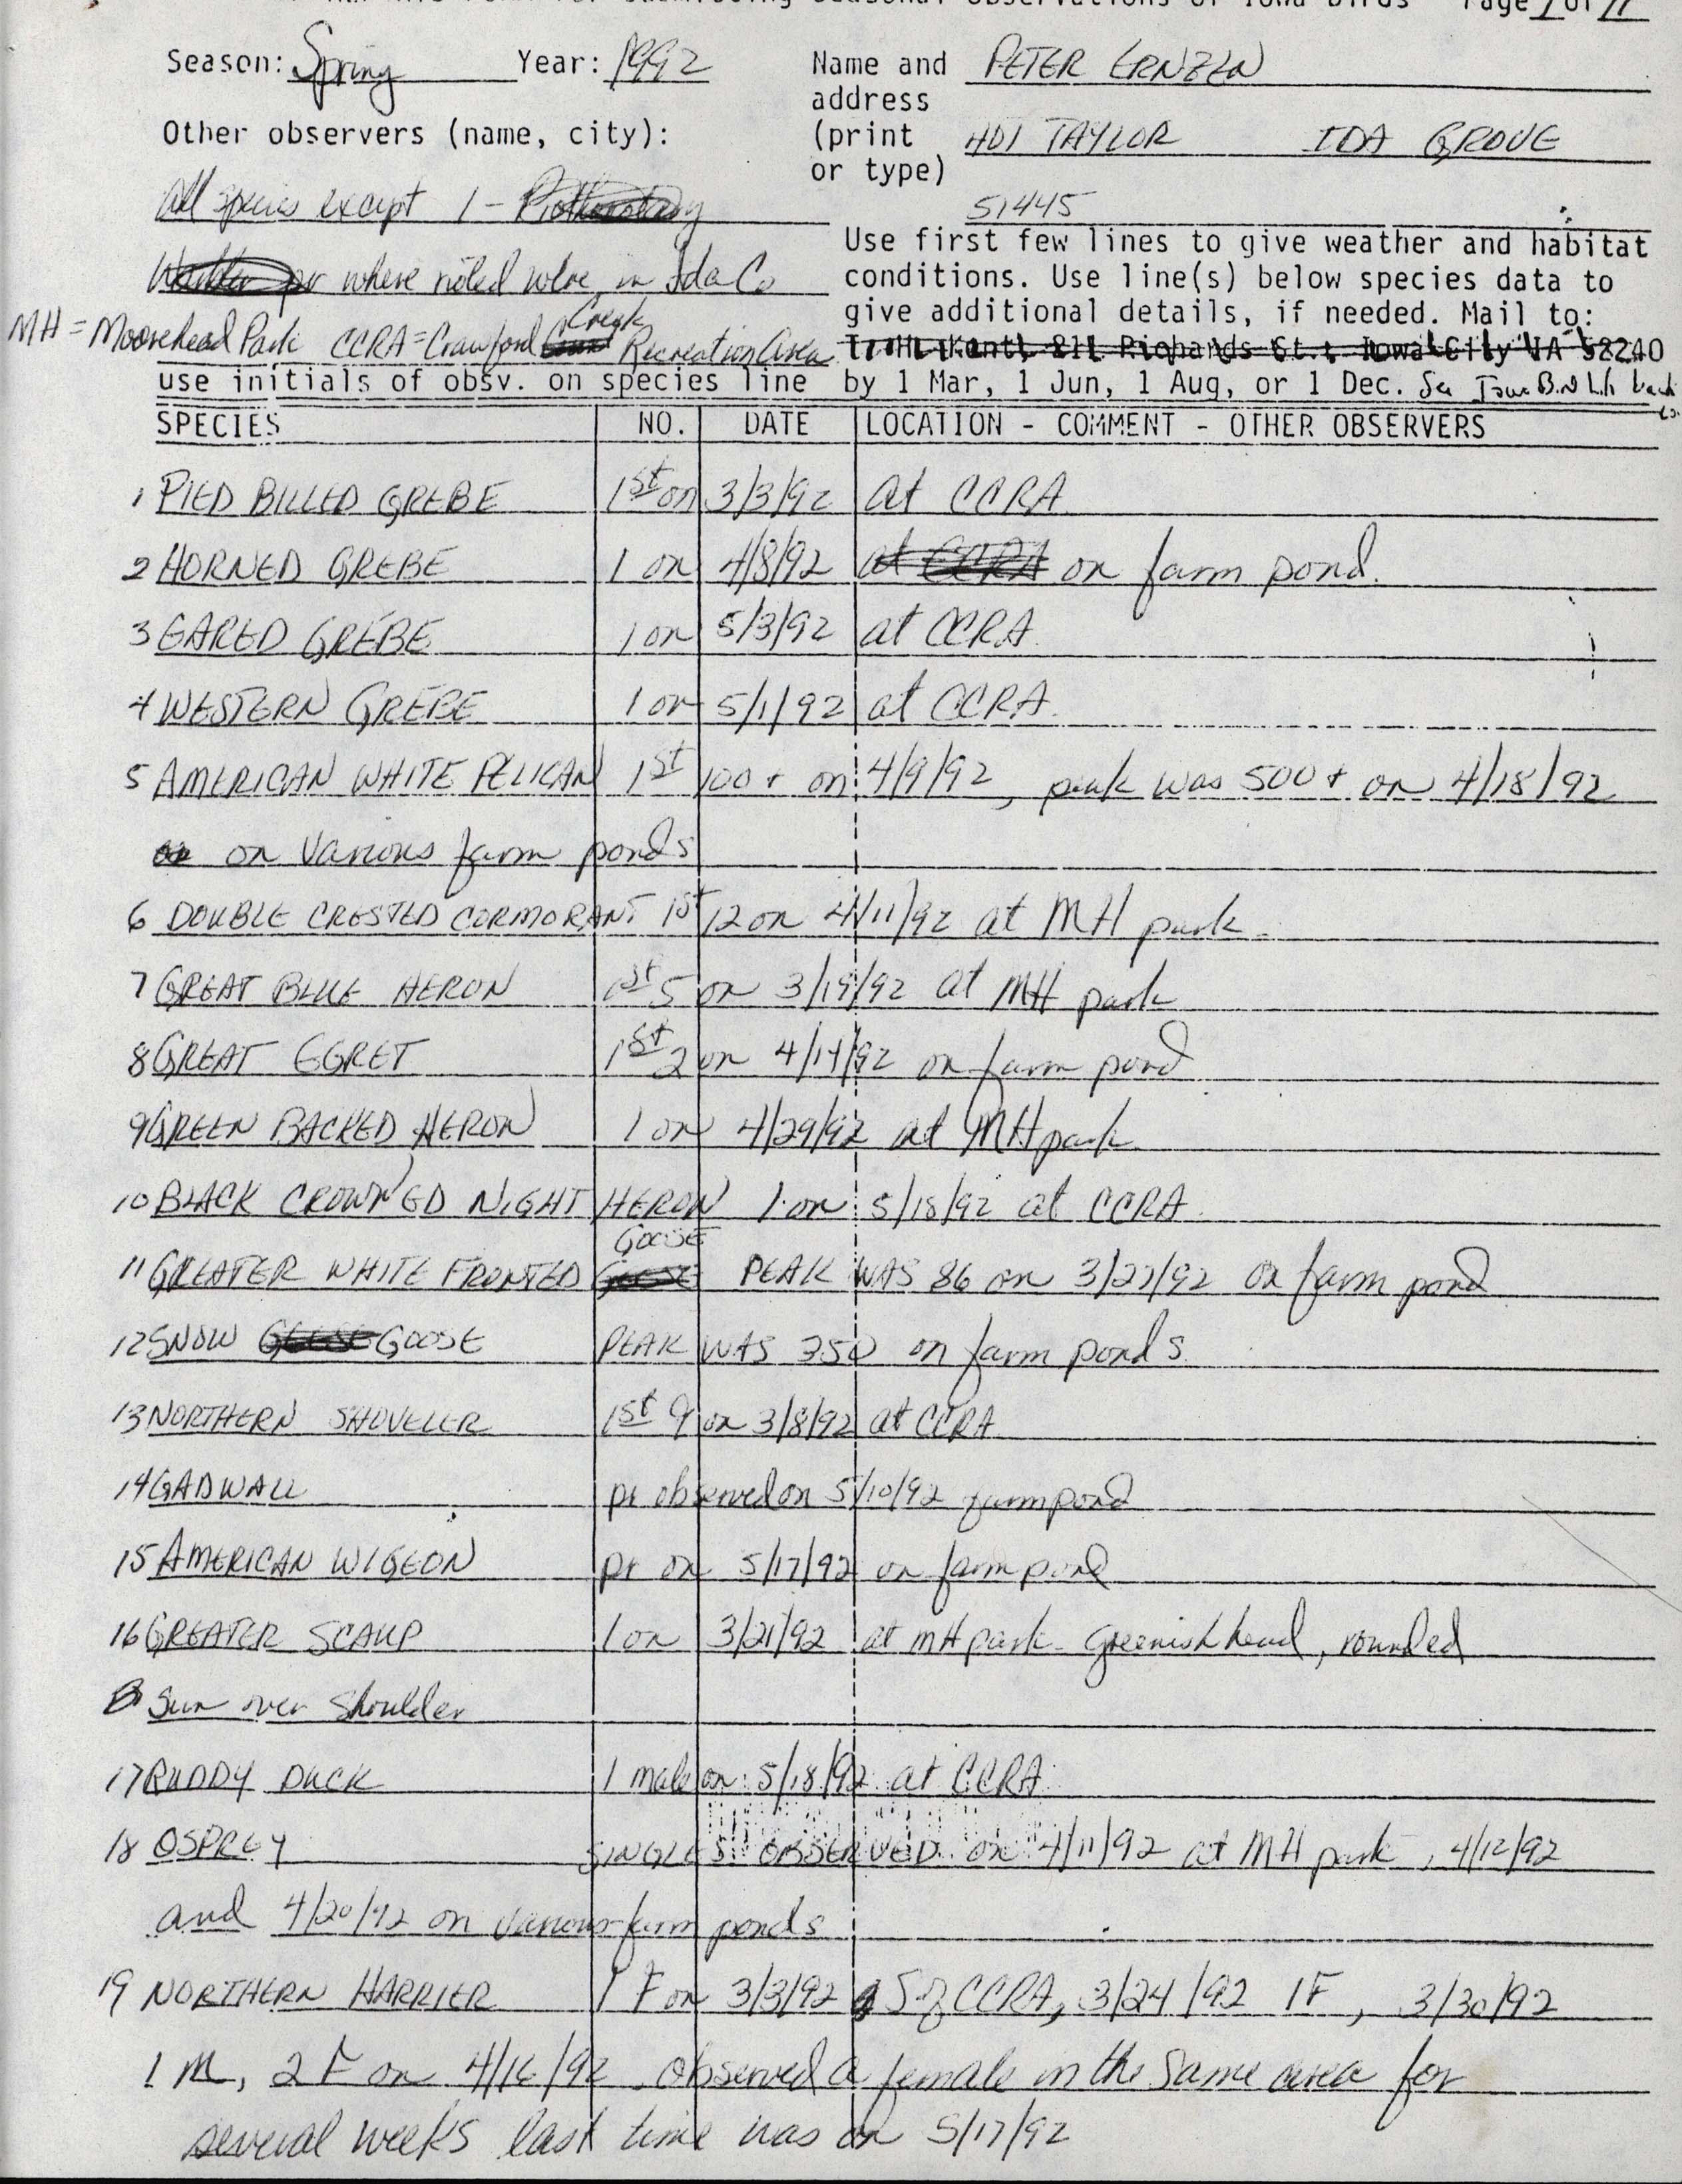 Field reports form for submitting seasonal observations of Iowa birds, Peter Ernzen, spring 1992